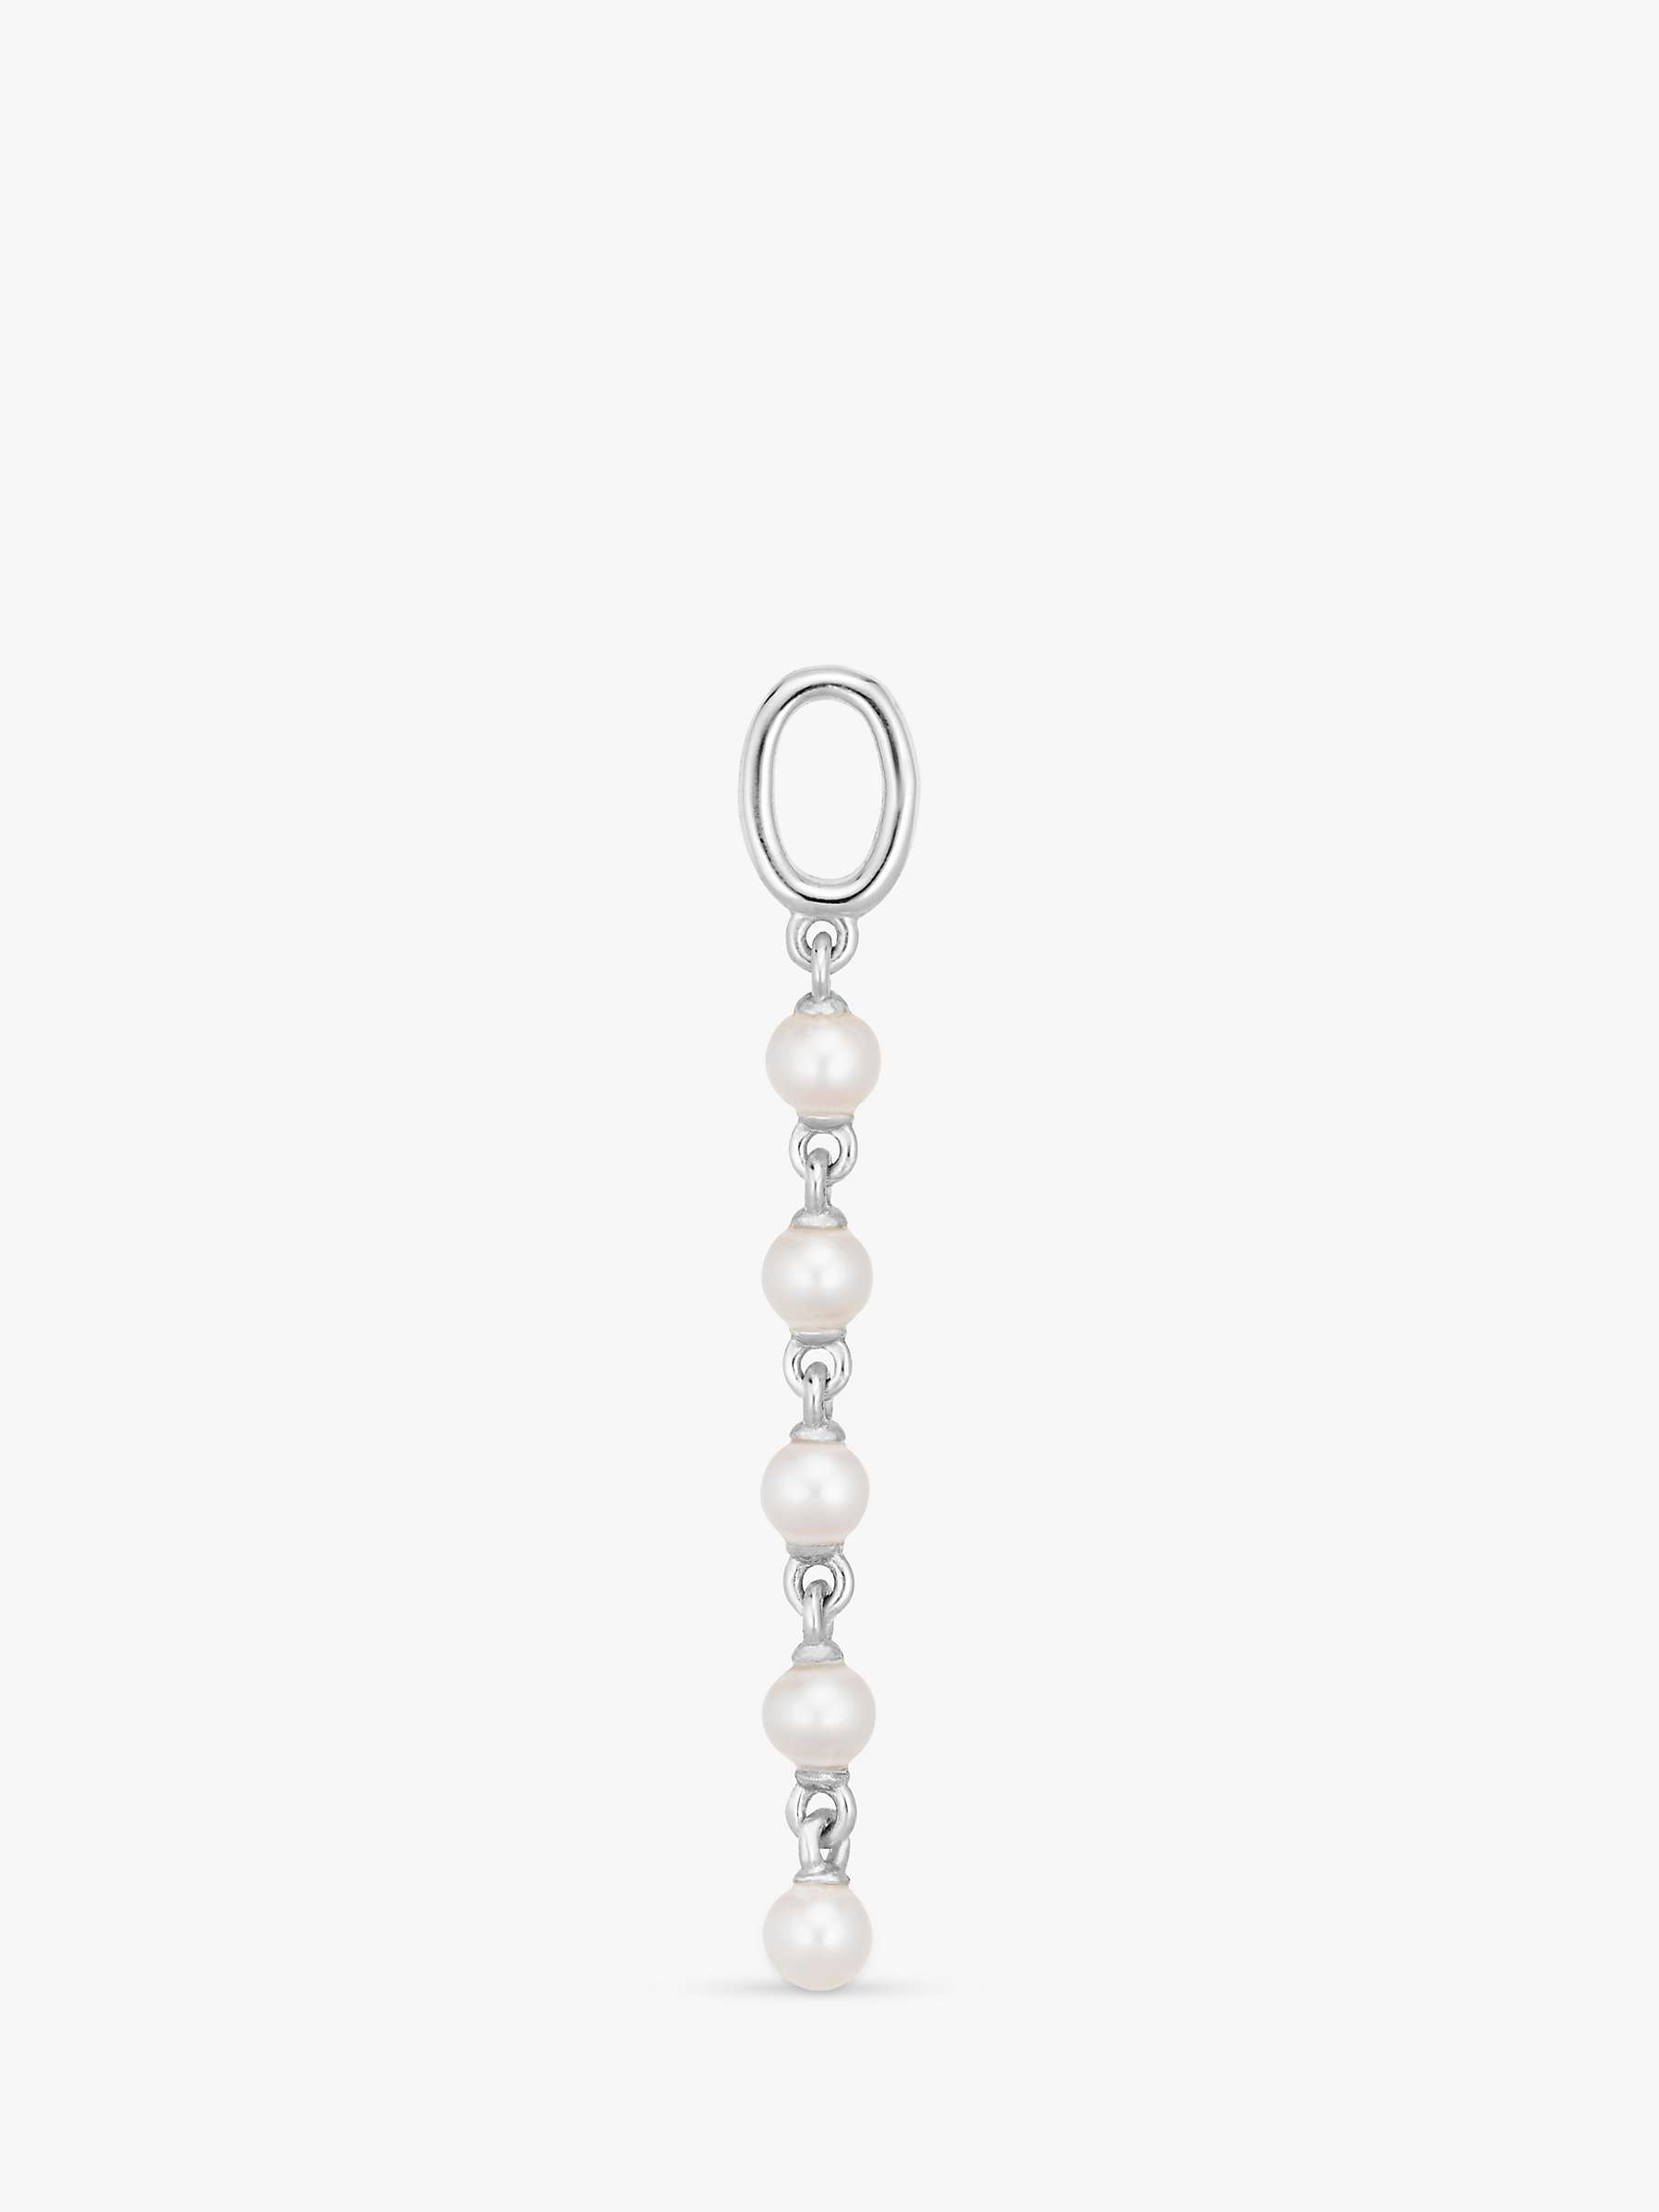 Buy Sif Jakobs Jewellery Freshwater Pearl Drop Charm Online at johnlewis.com